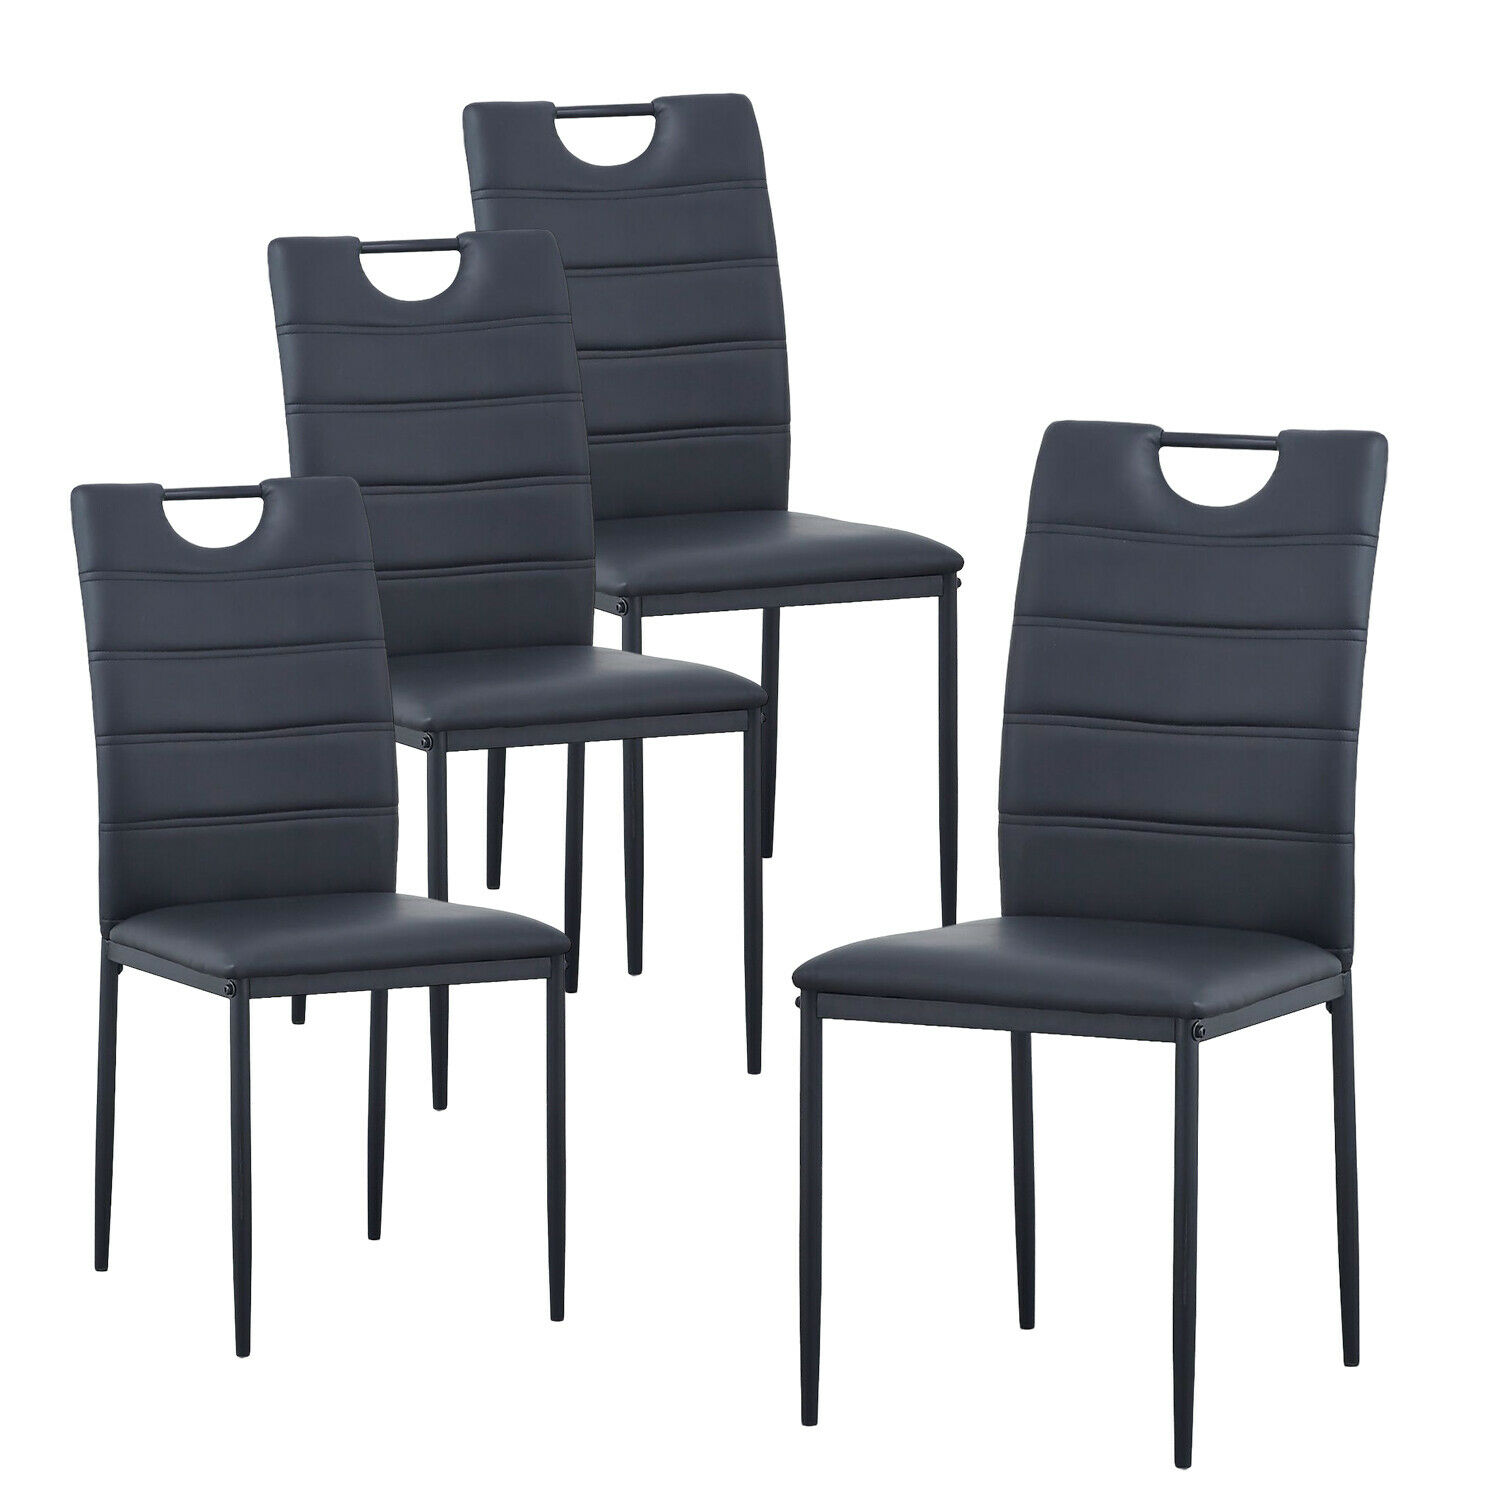 Set of 4 Leather Dining Chairs Living Room Chairs w/ High Back for Dining Room